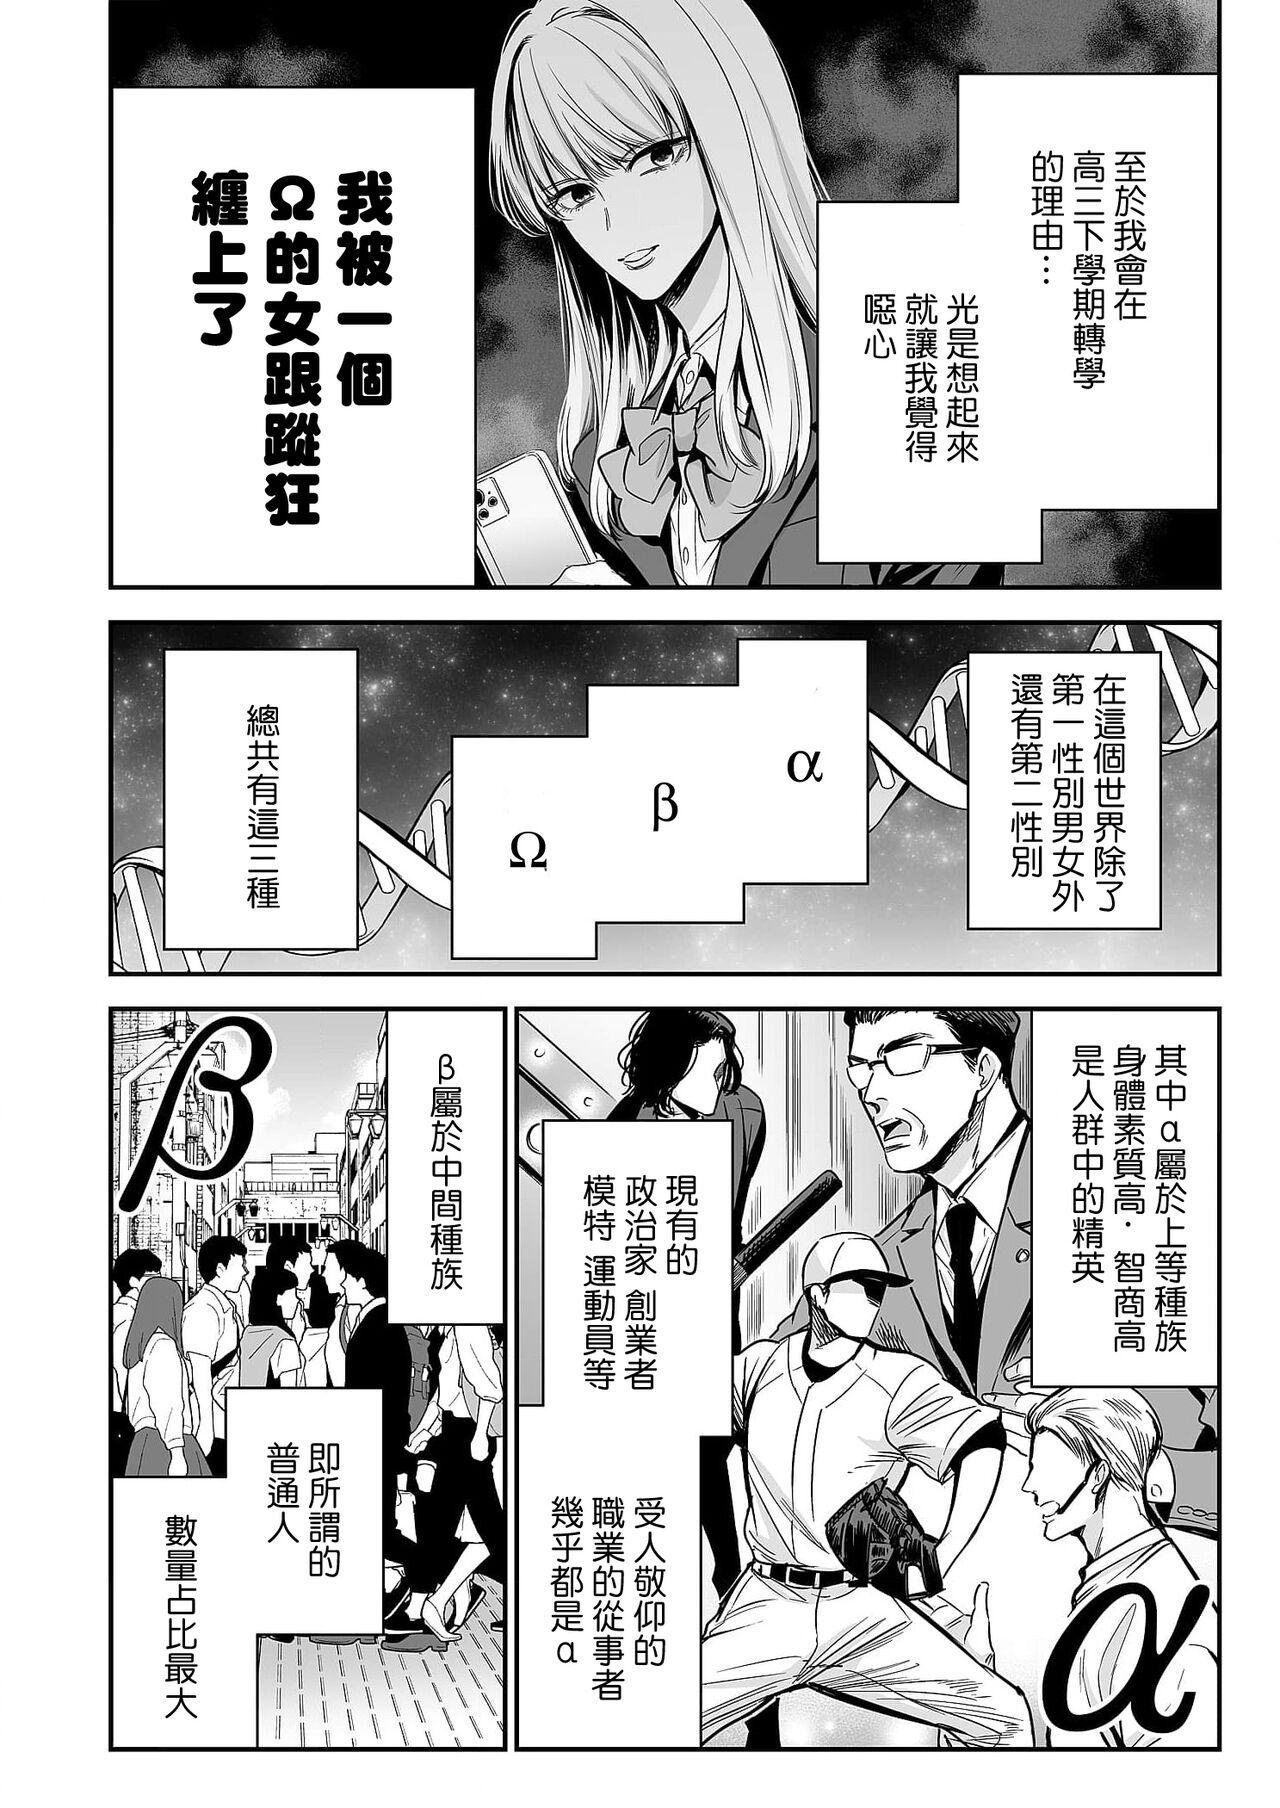 Lovers anta wa ore no omegadaro | 你是我的Omega吧 1-6 Teenage Sex - Page 11